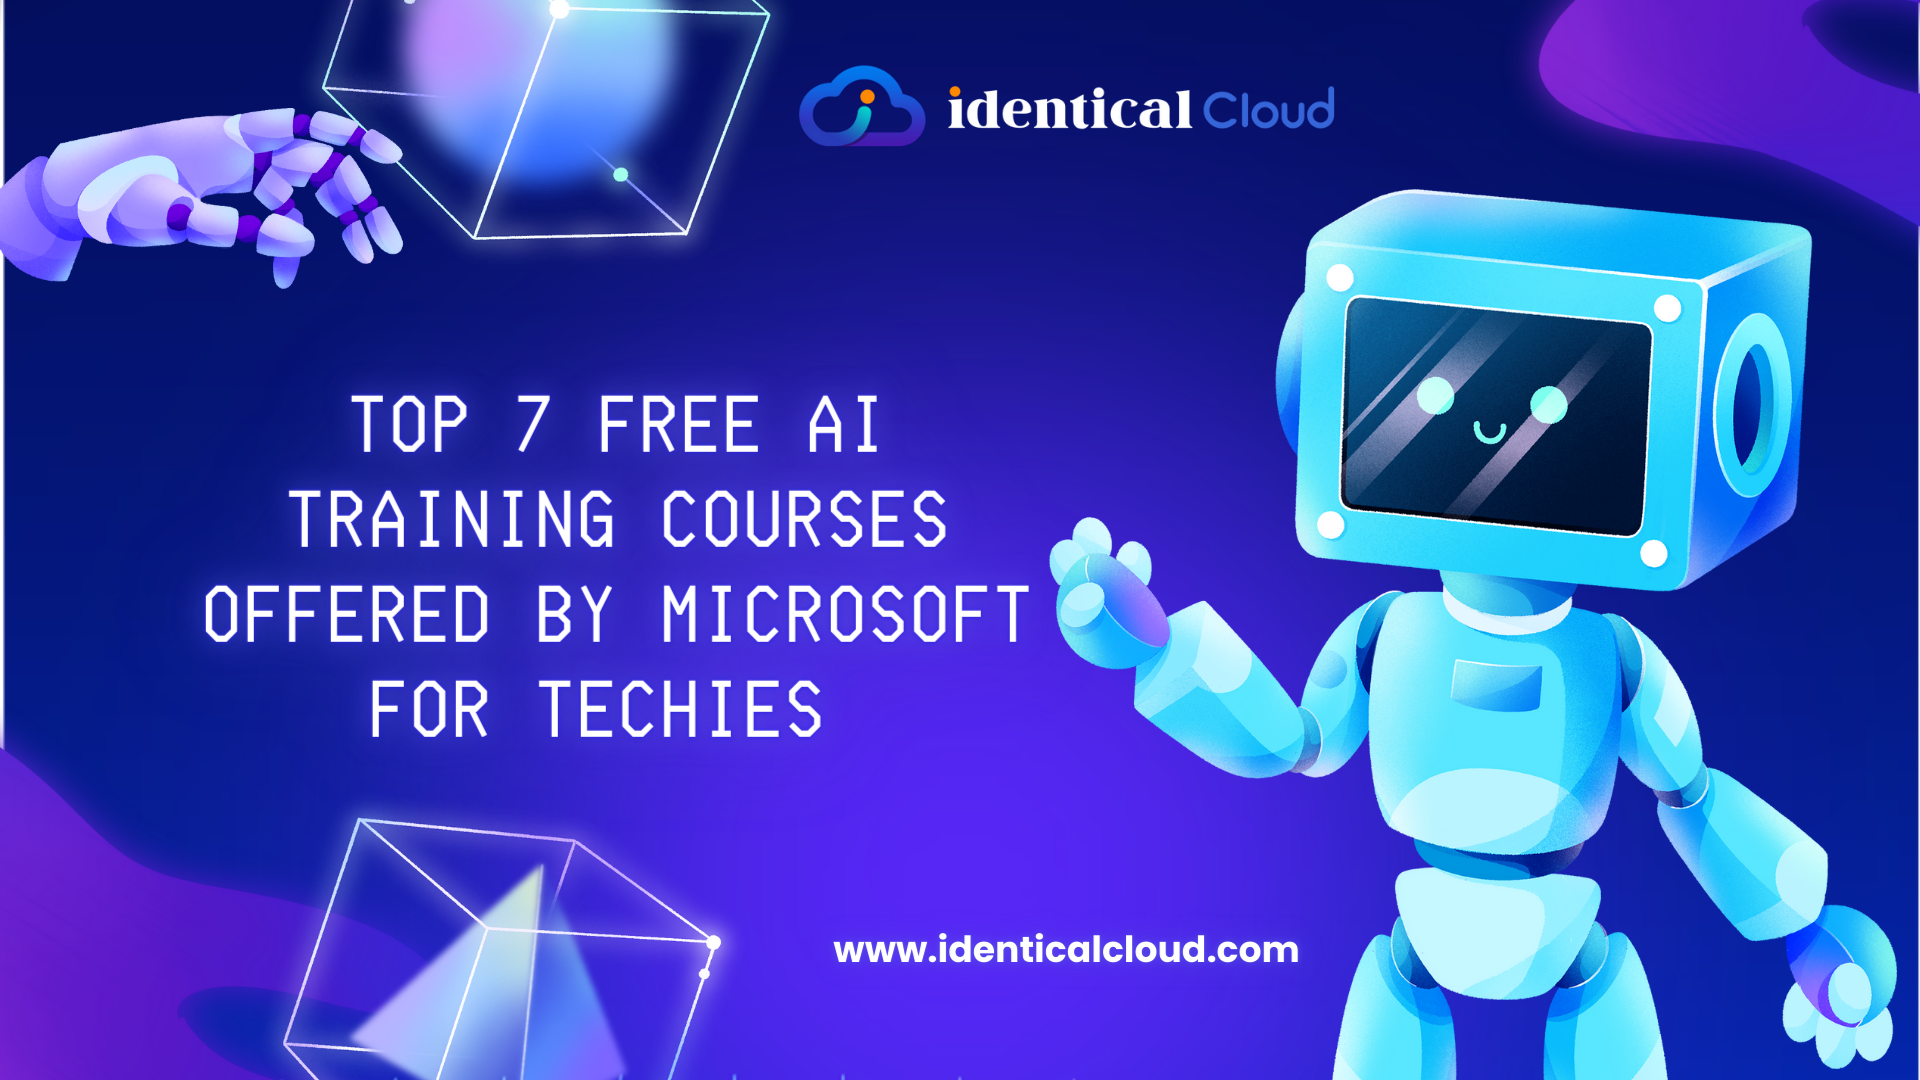 Top 7 Free AI Training Courses Offered by Microsoft for Techies - www.identicalcloud.com